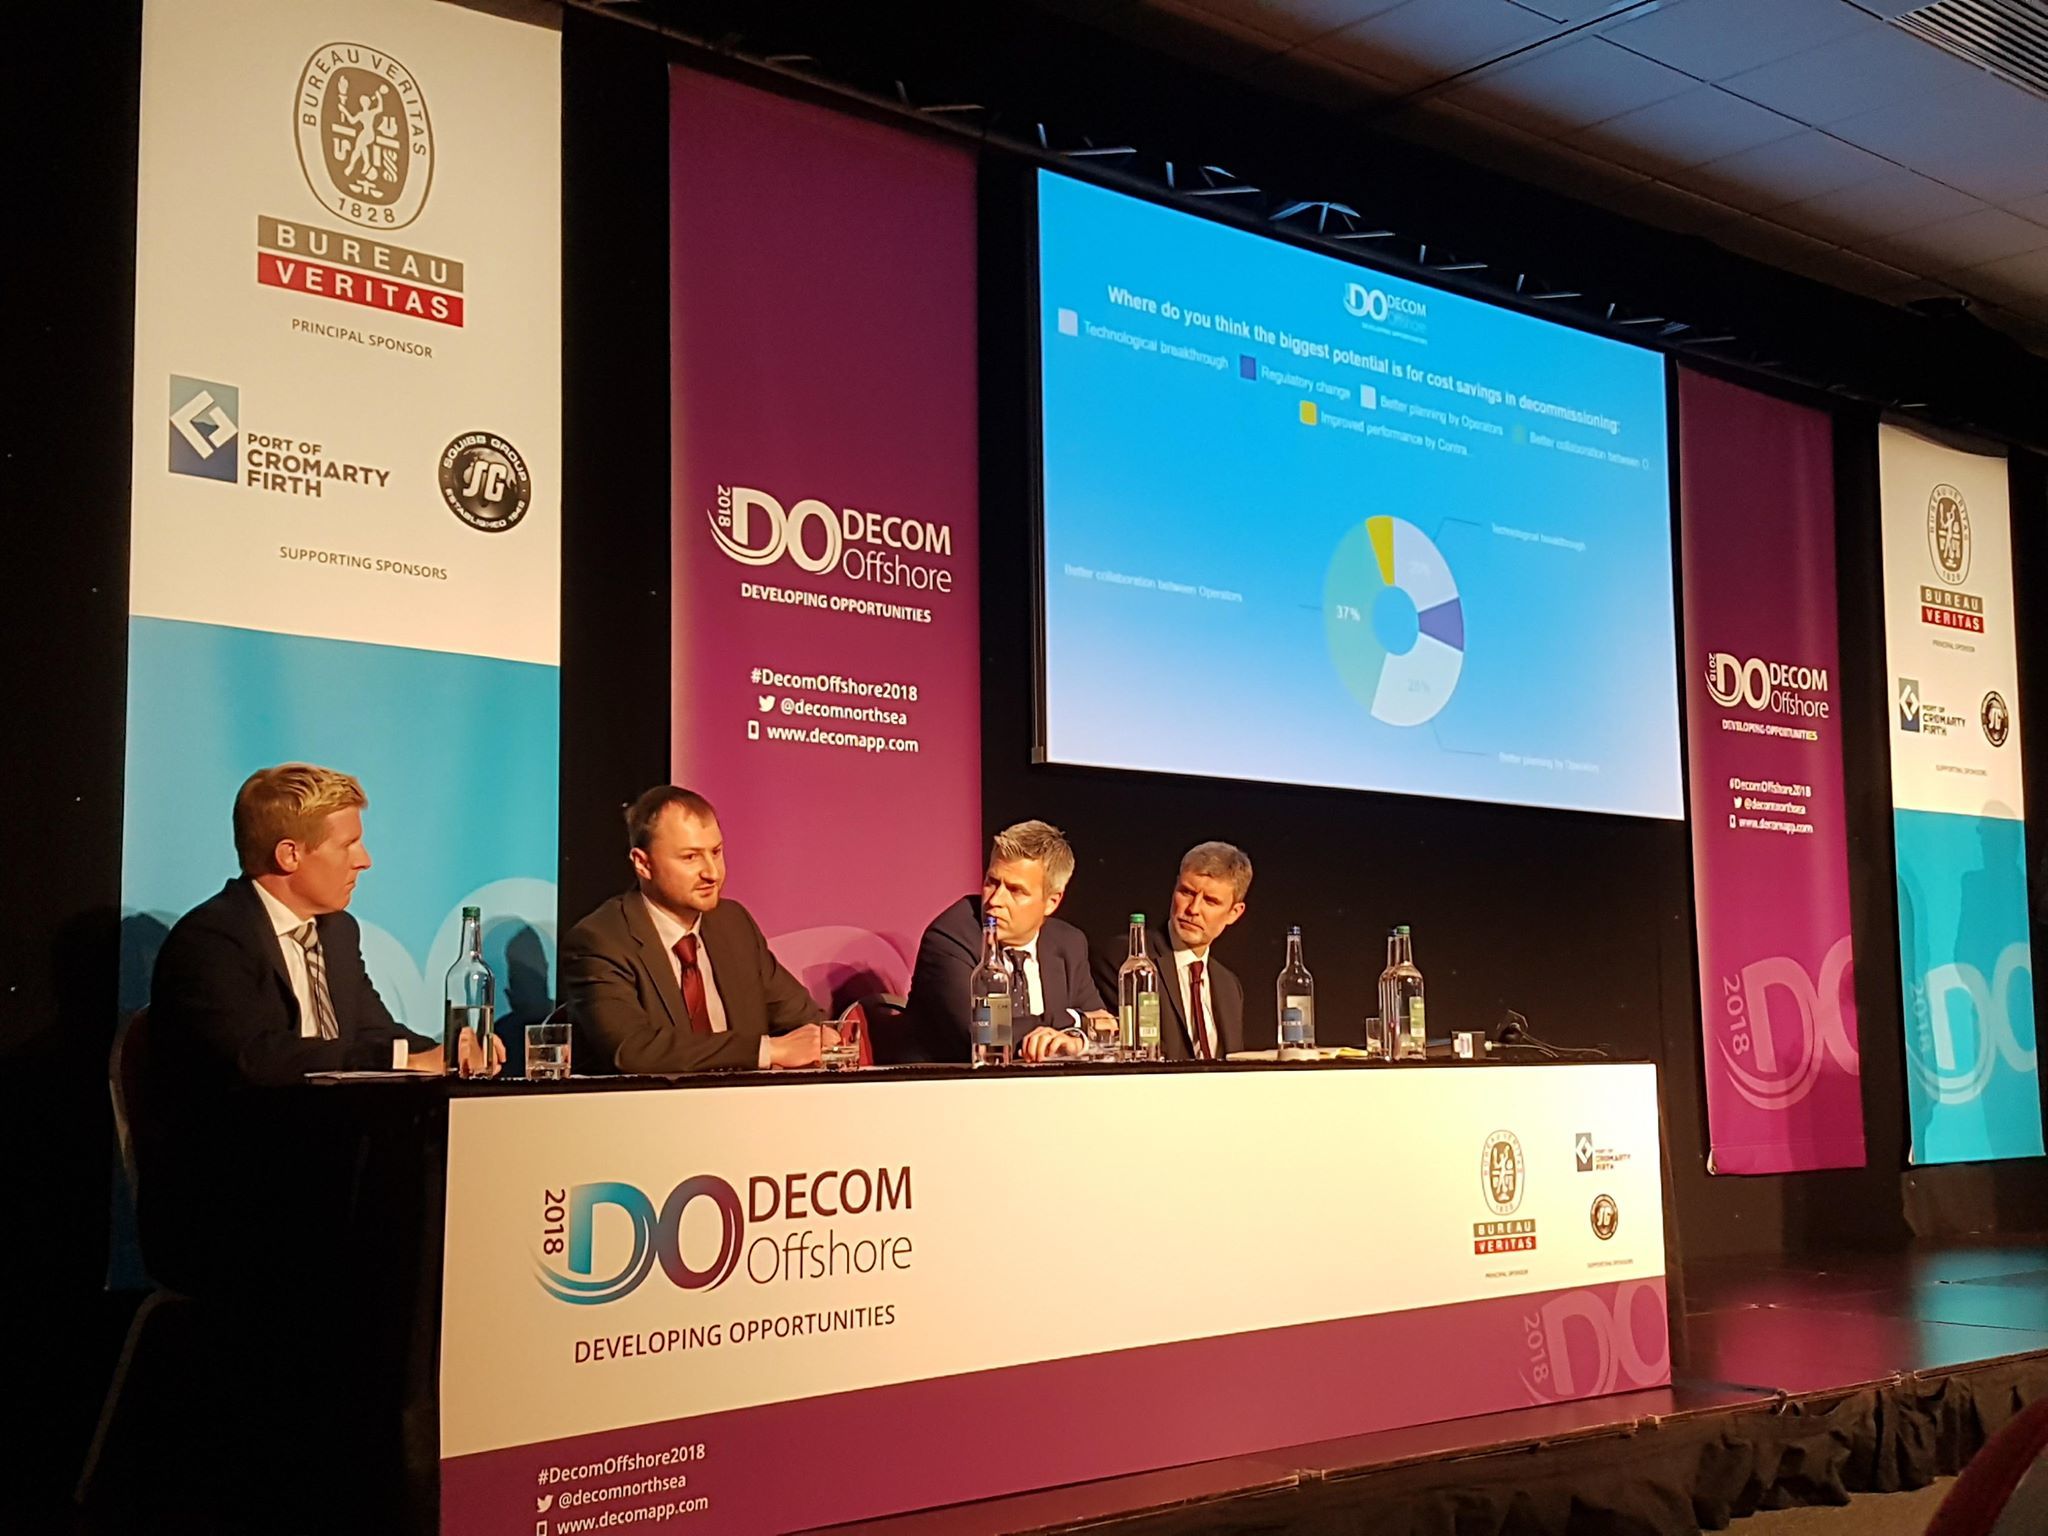 L to R: Graeme Fergusson of Decom Energy, Innes Jordan from Nexen, Nick Dalgarno of Simmons and Co., and Barry MacLeod from Bibby Offshore